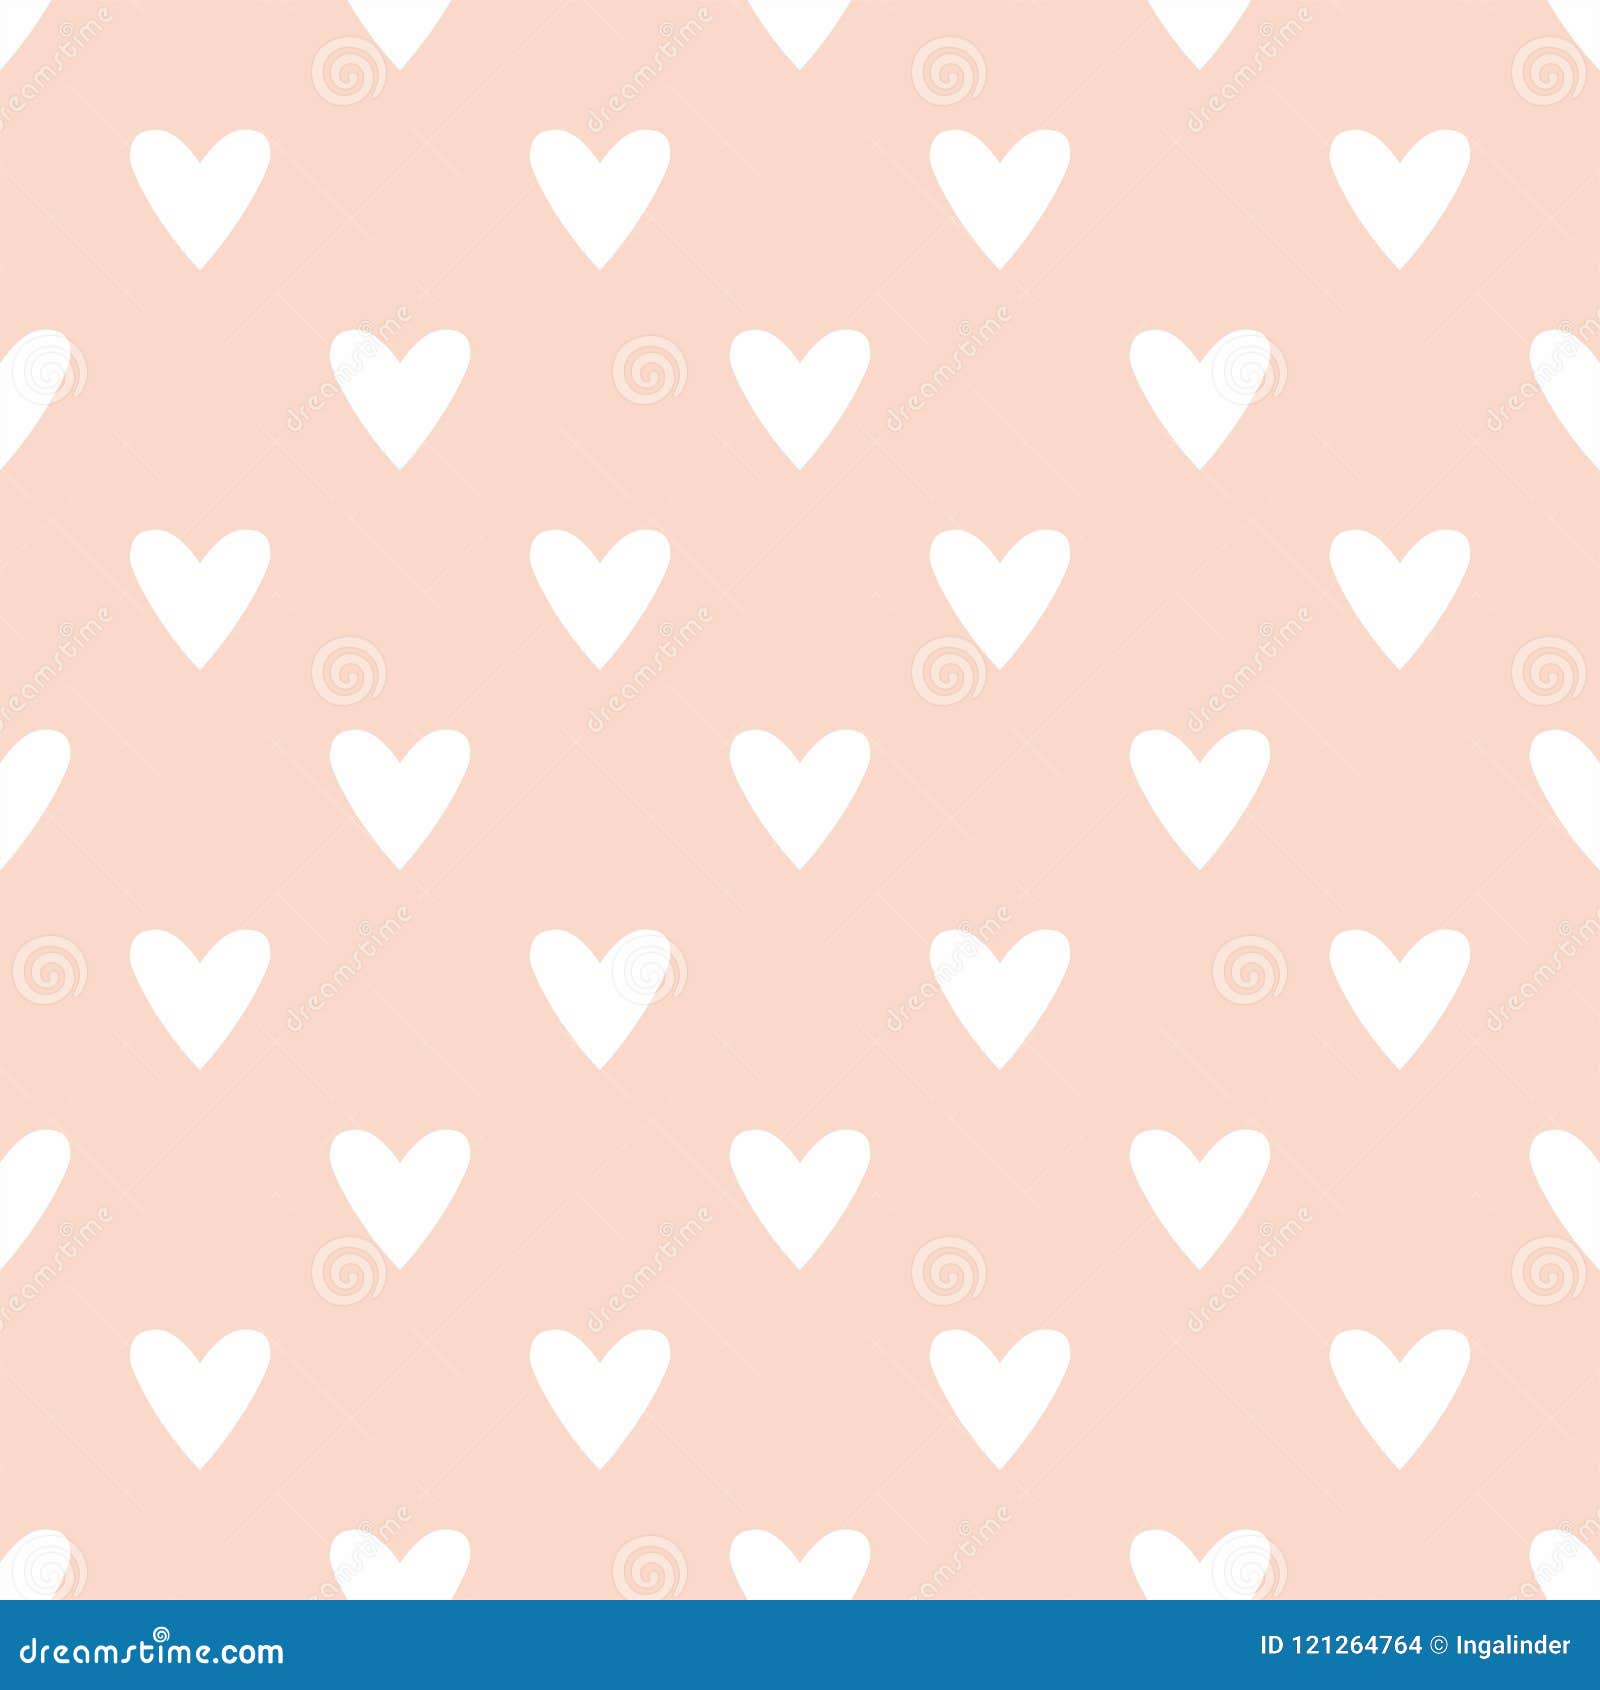 Tile Cute Vector Pattern With White Hearts On Pastel Pink Background Stock Vector Illustration Of Pattern Marriage 121264764